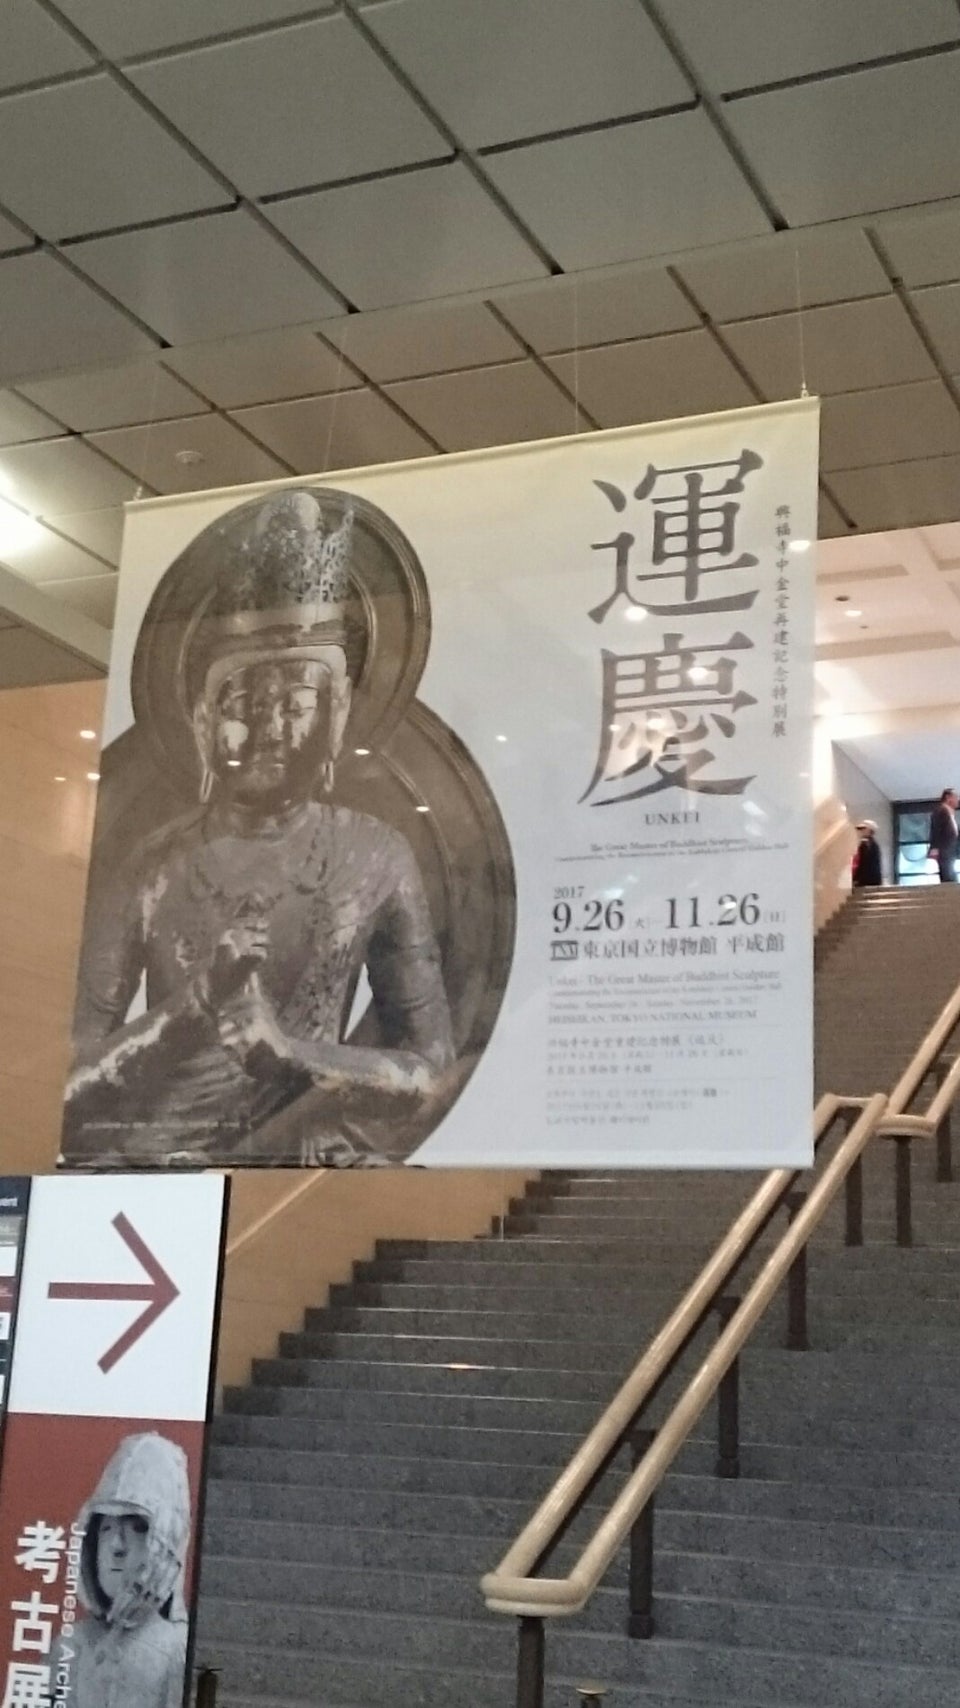 Photo of Tokyo National Museum